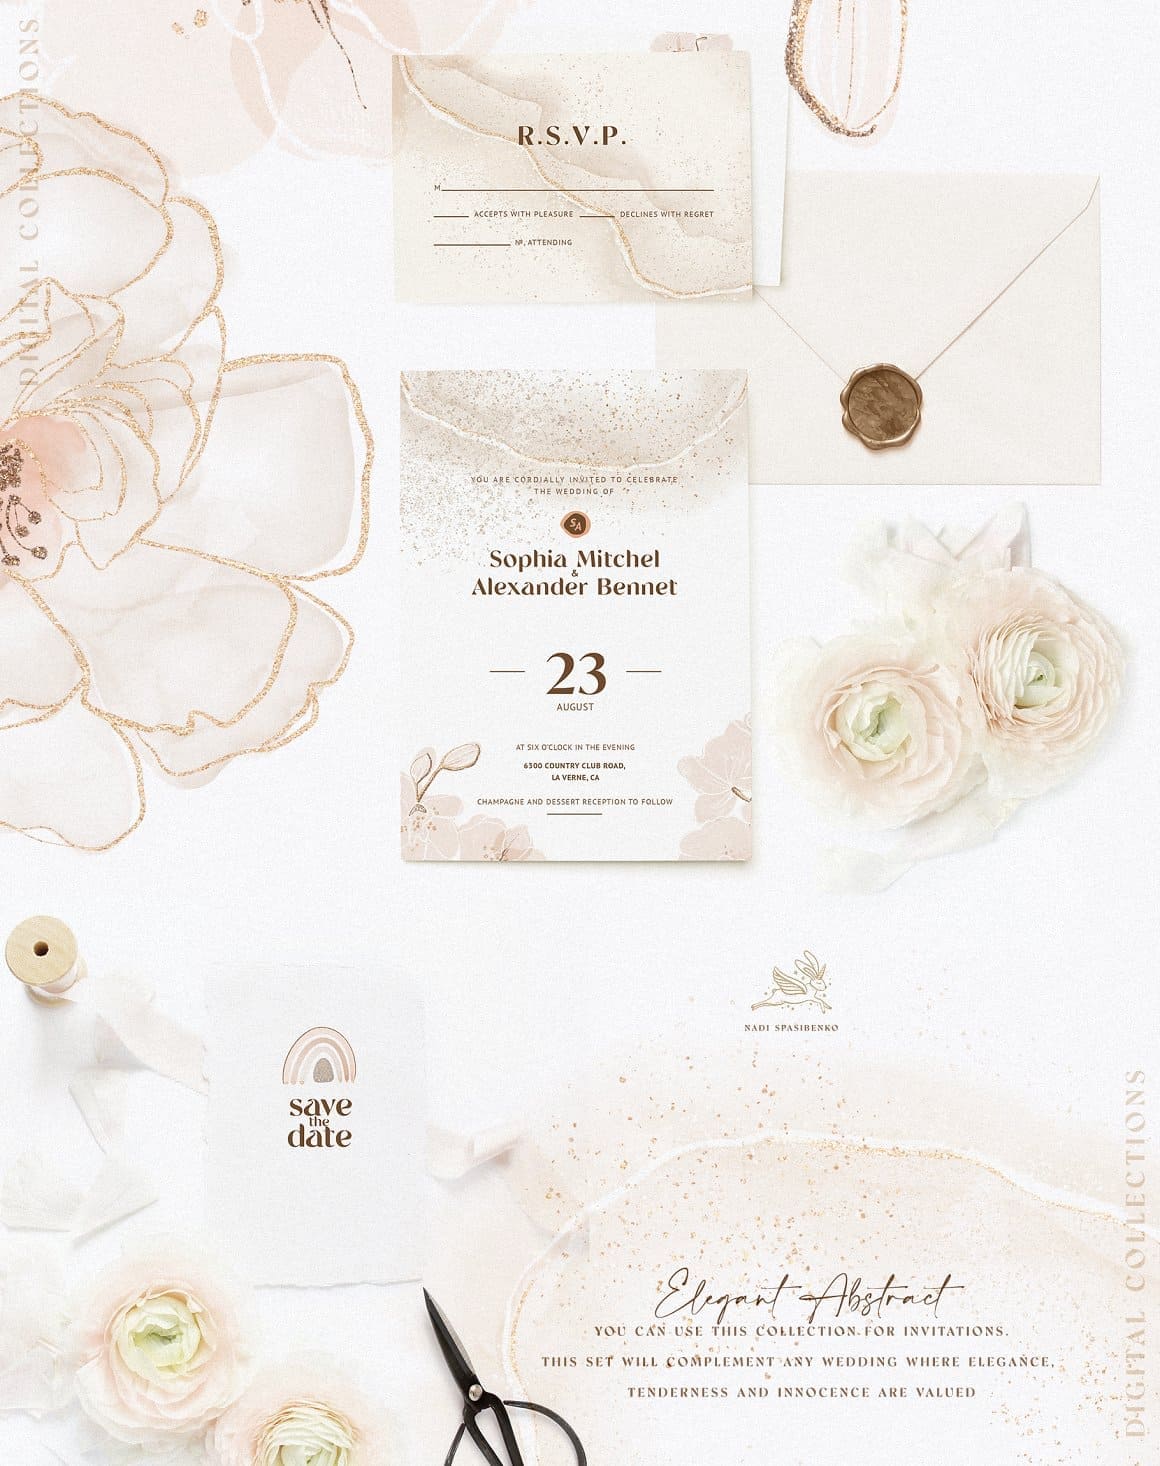 Invitations with a special design from Sofia and Alexander.